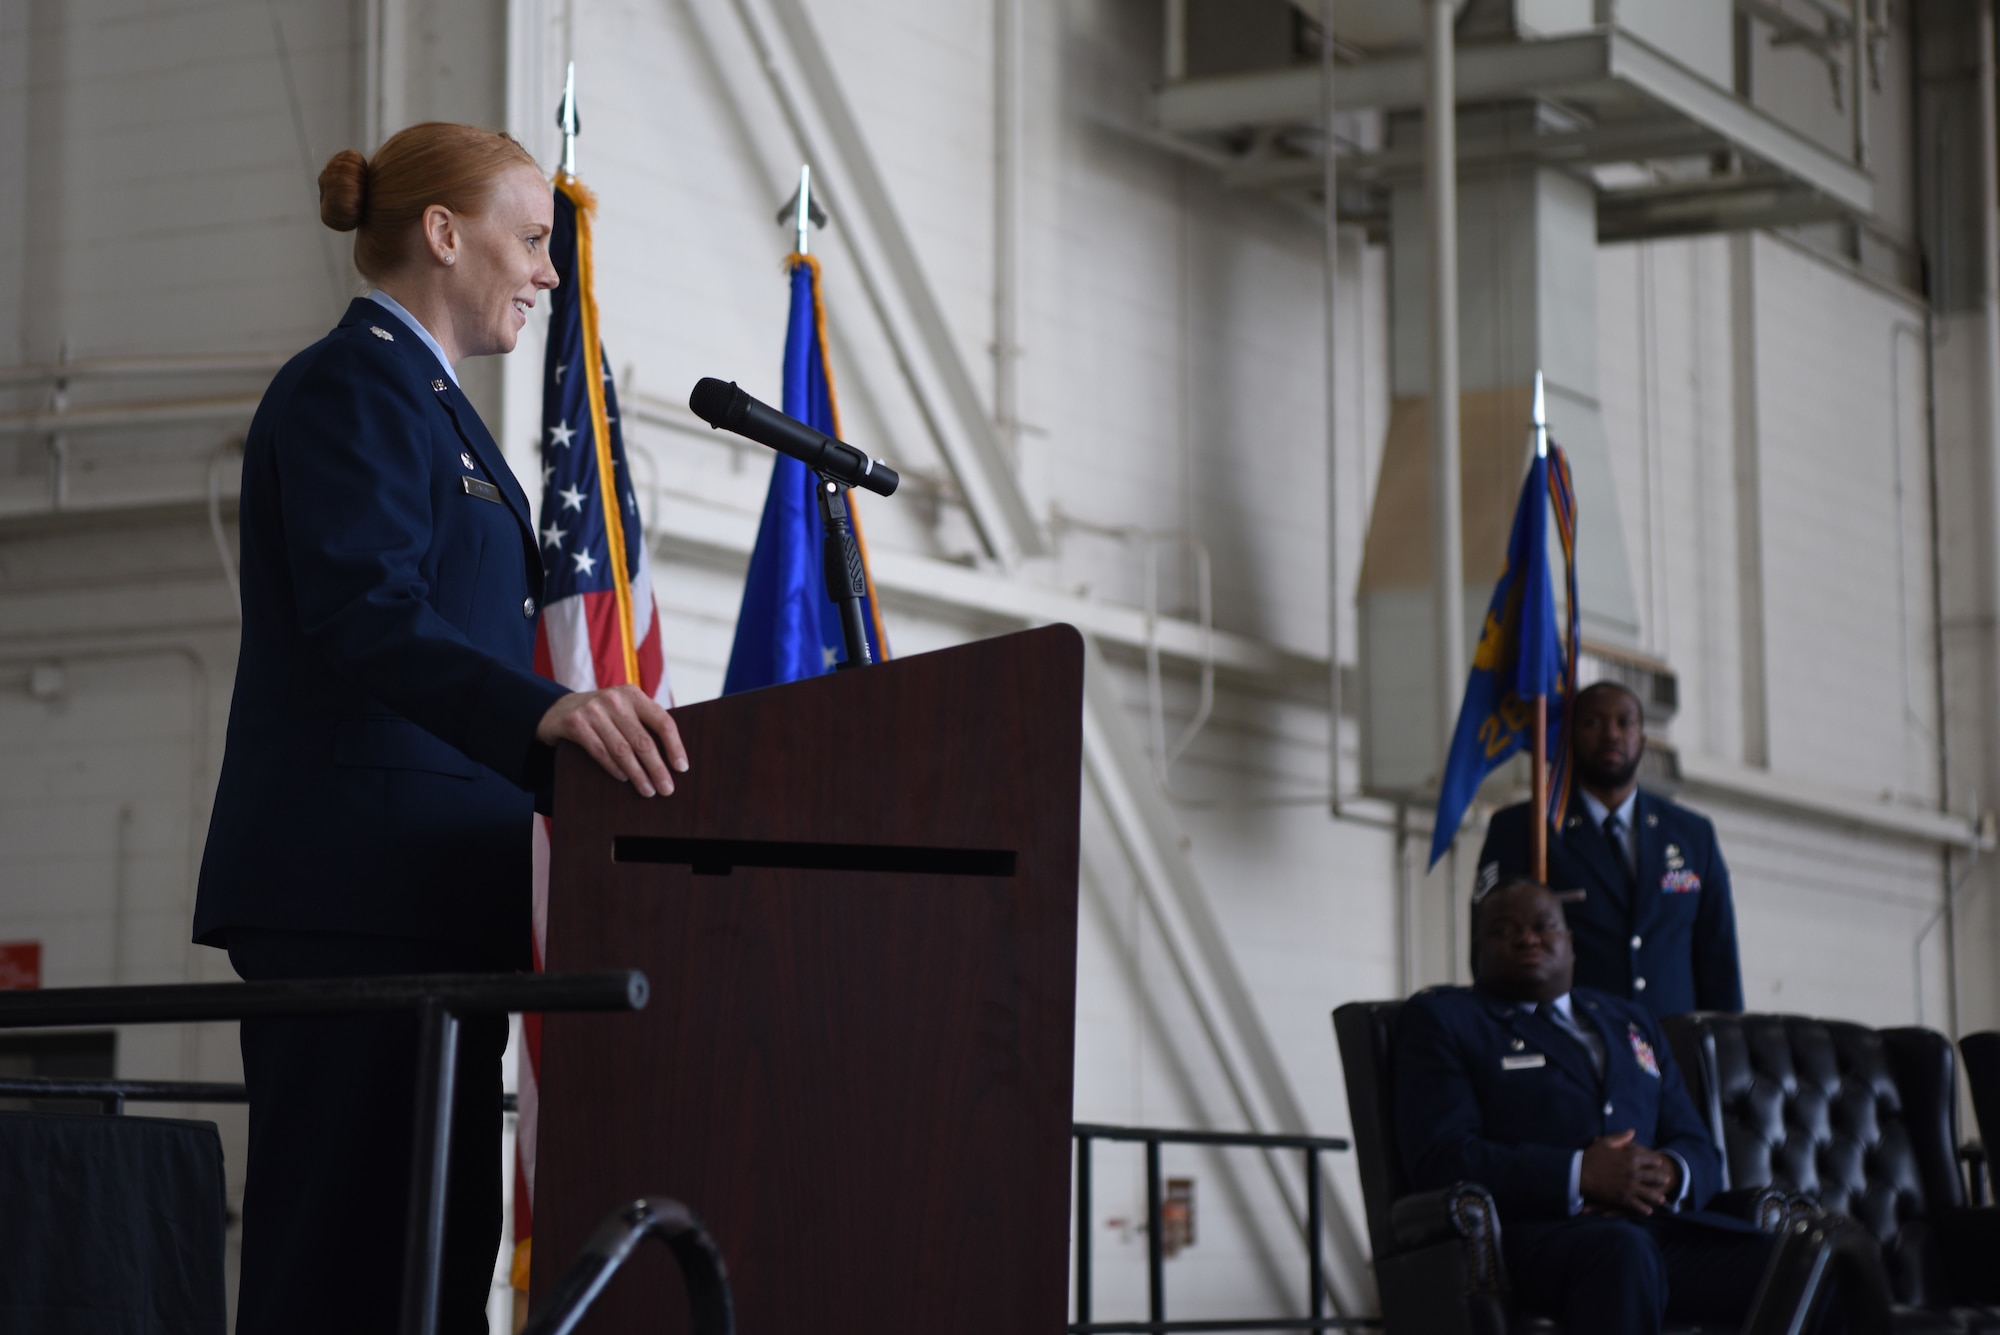 U.S. Air Force Lt. Col. Kristen Jenkins, 28th Bomb Squadron commander, delivers remarks after assuming command of the squadron during the 28th BS change of command ceremony inside the Three Bay Hangar at Dyess Air Force Base, Texas, April 22, 2022. Jenkins assumed command of the 28th BS which provides all B-1 initial qualification and instructor upgrade training. (U.S. Air Force photo by Staff Sgt. Holly Cook)